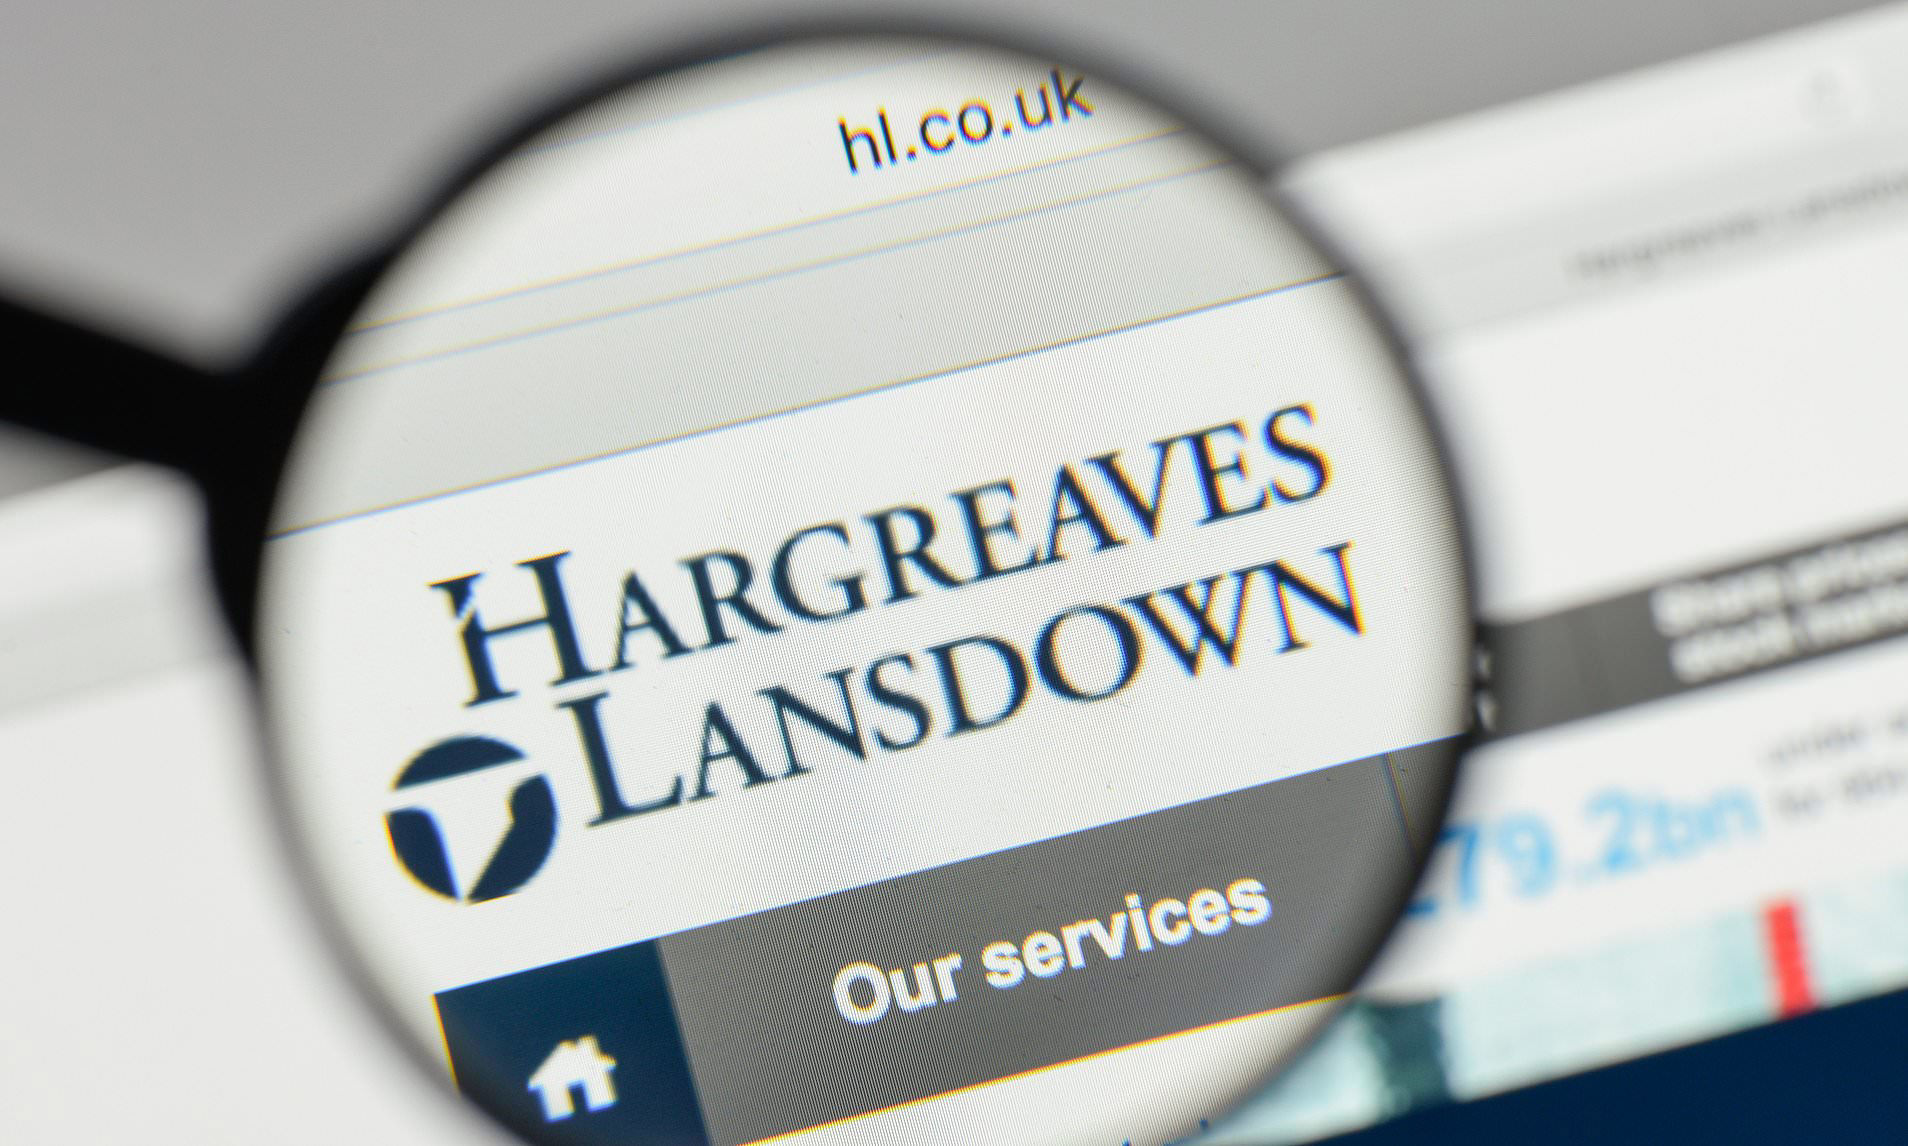 MARKET REPORT: Hargreaves Lansdown shares up on investment boom